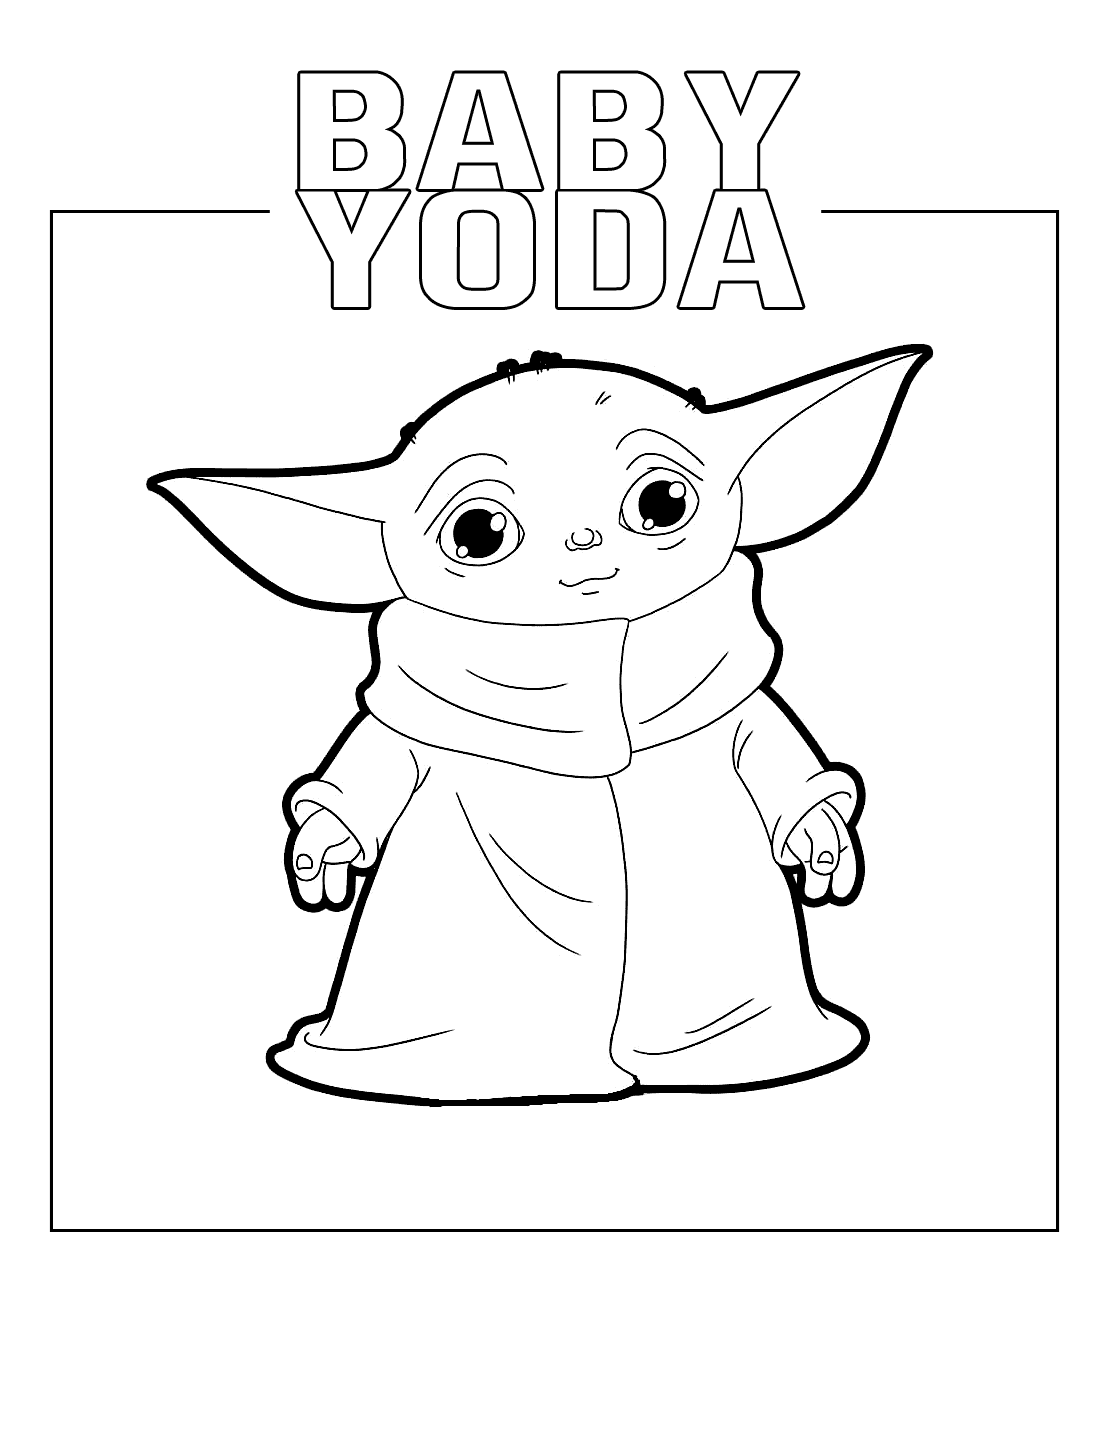 Printable Baby Yoda Coloring Pages